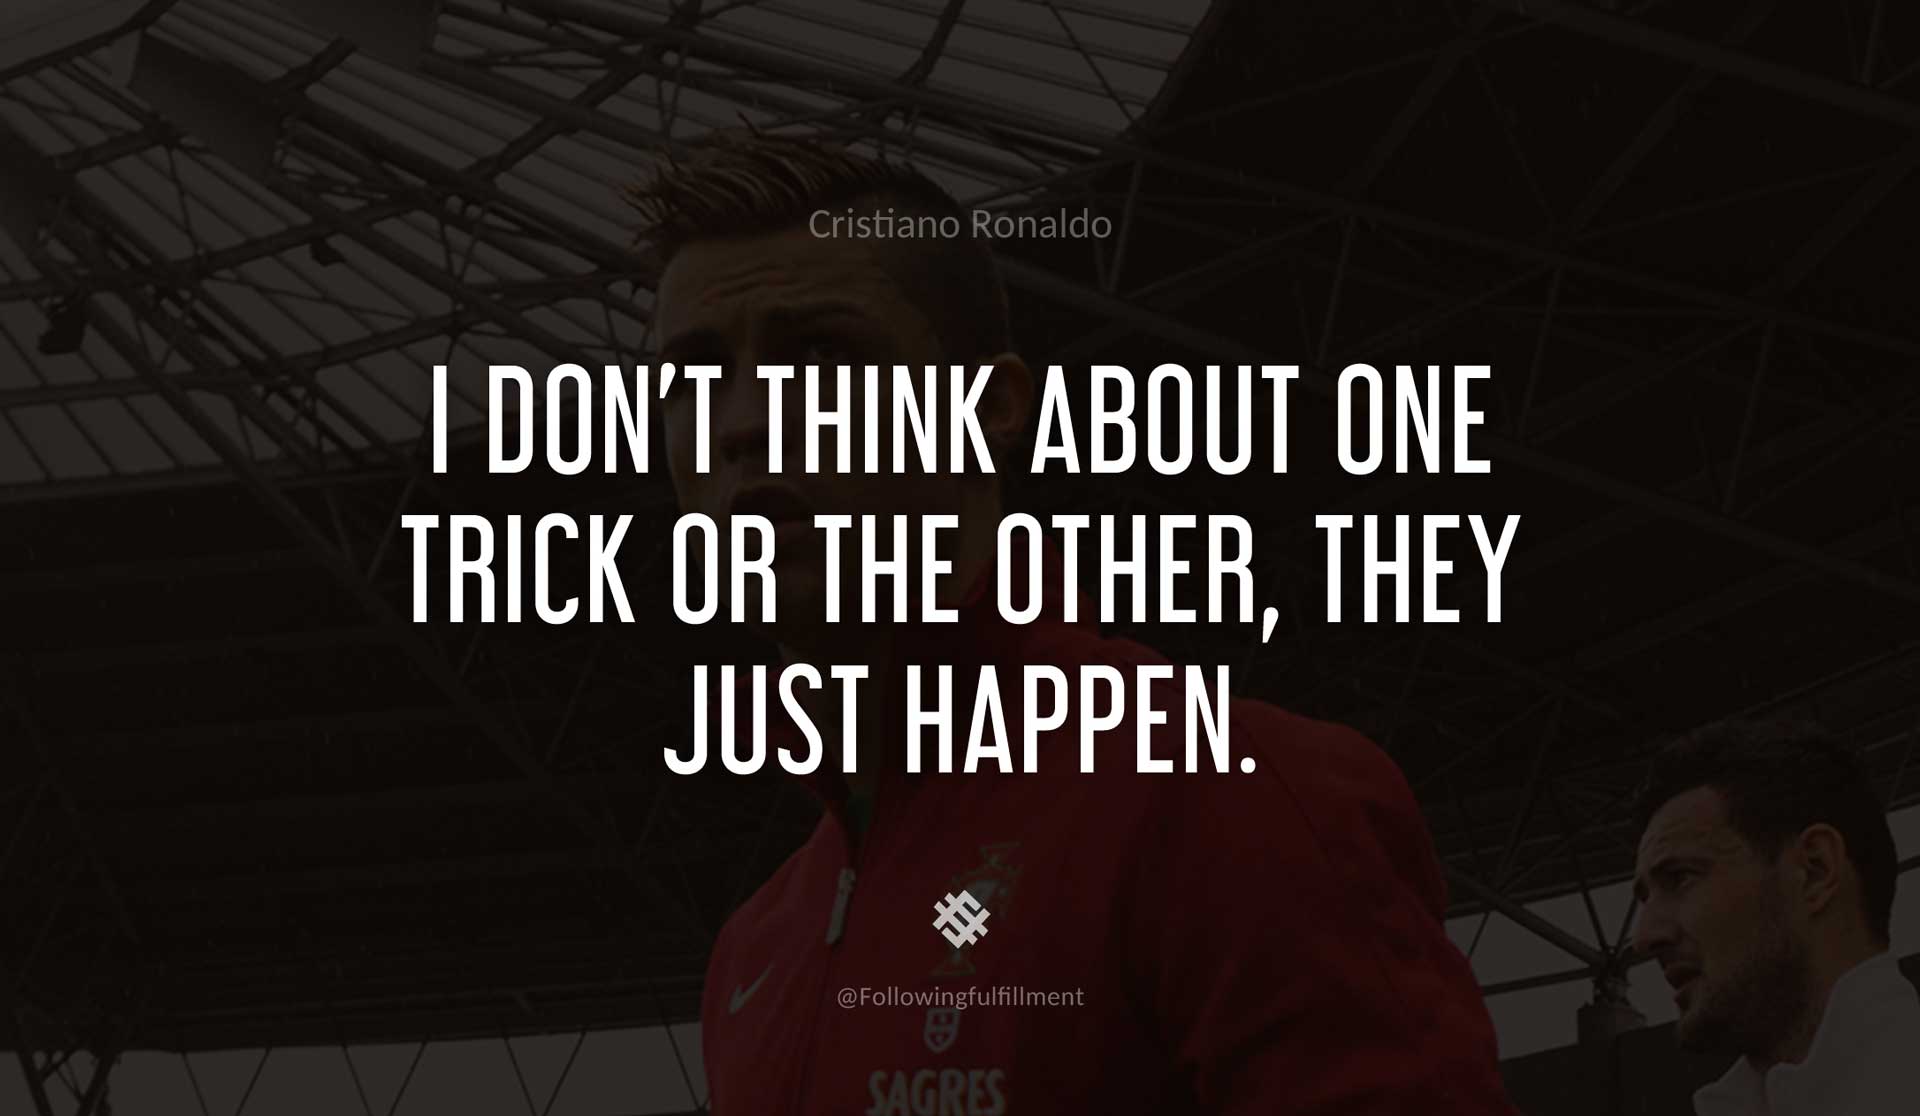 I-don't-think-about-one-trick-or-the-other,-they-just-happen.-CRISTIANO-RONALDO-Quote.jpg